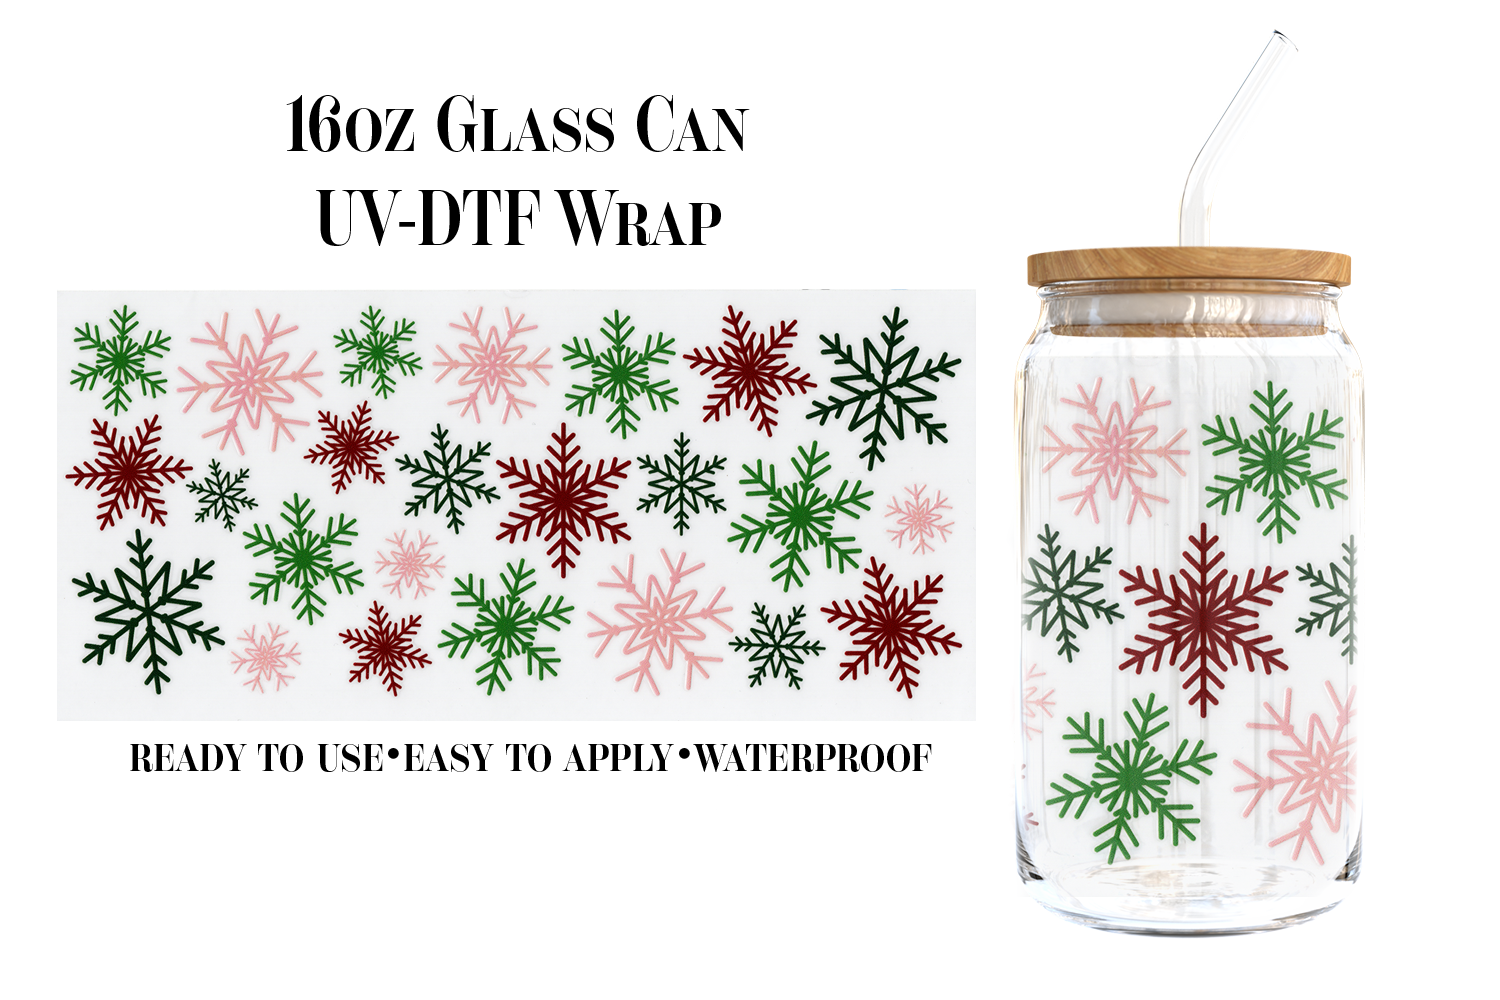 #125) Red Green Snowflakes UVDTF 16oz Wrap